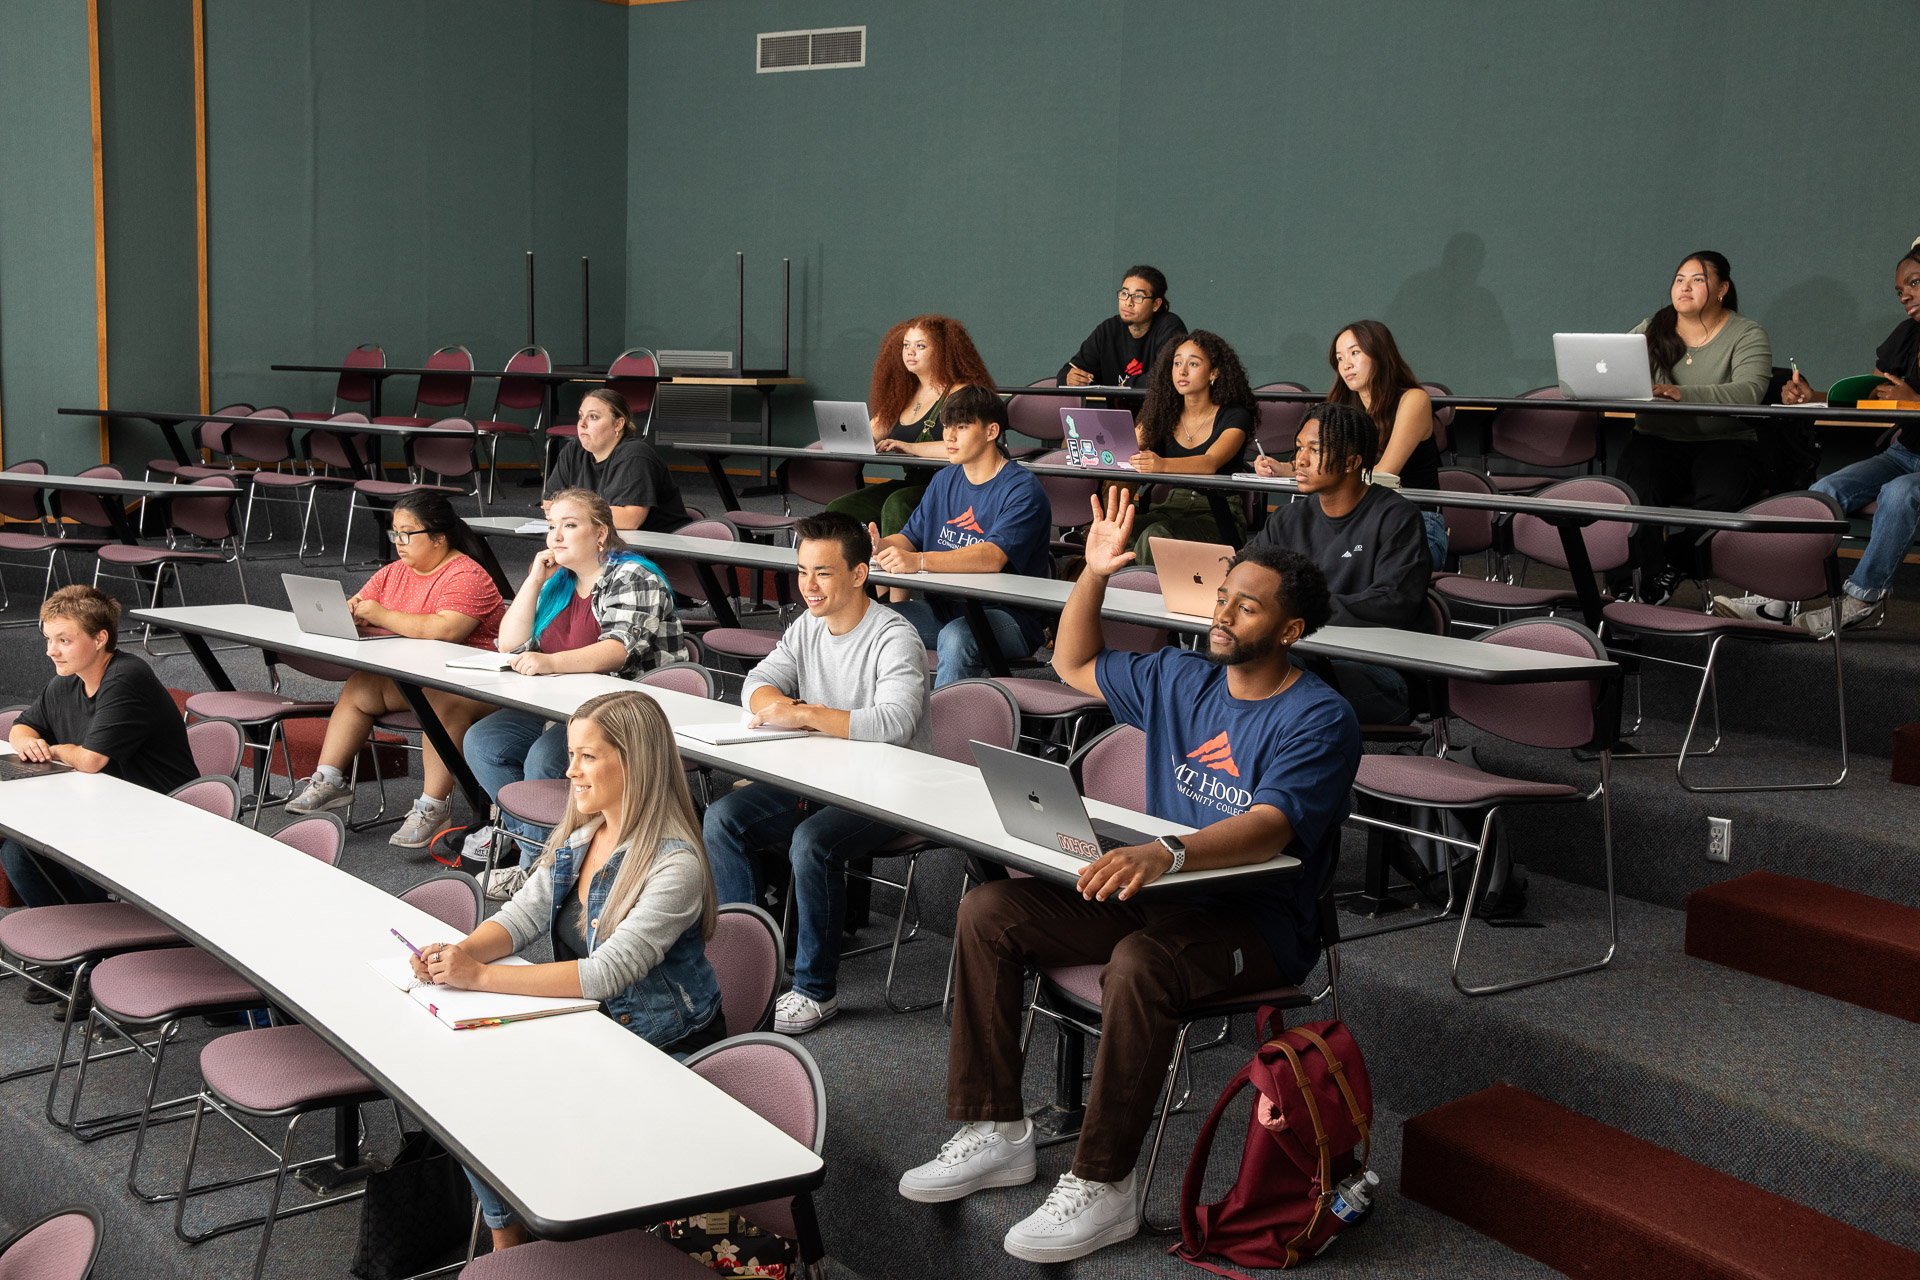 Students in a an auditorium-style classroom. One student has their hand raised.